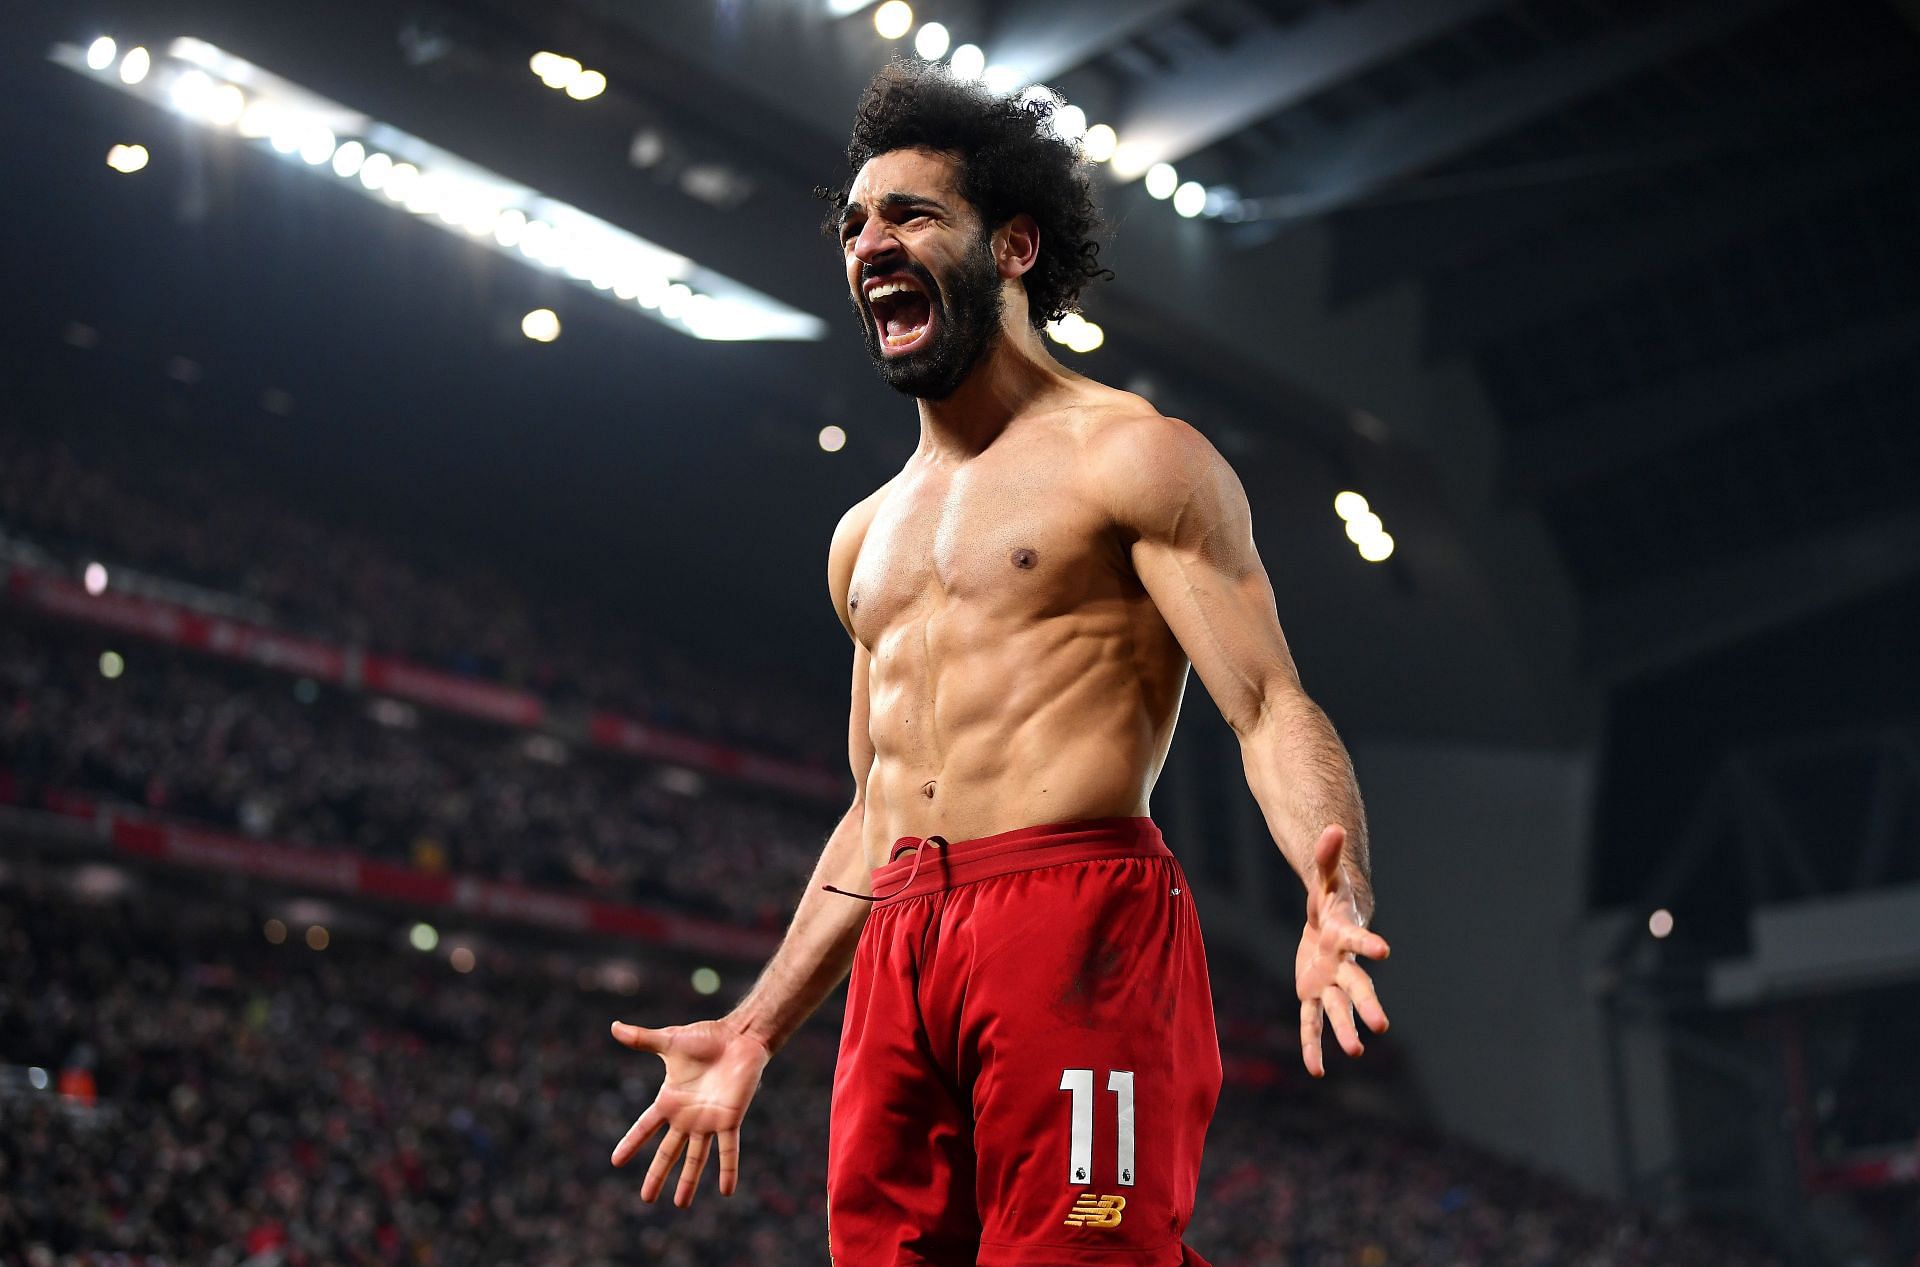 Liverpool will be hoping for Salah to fire against Manchester City